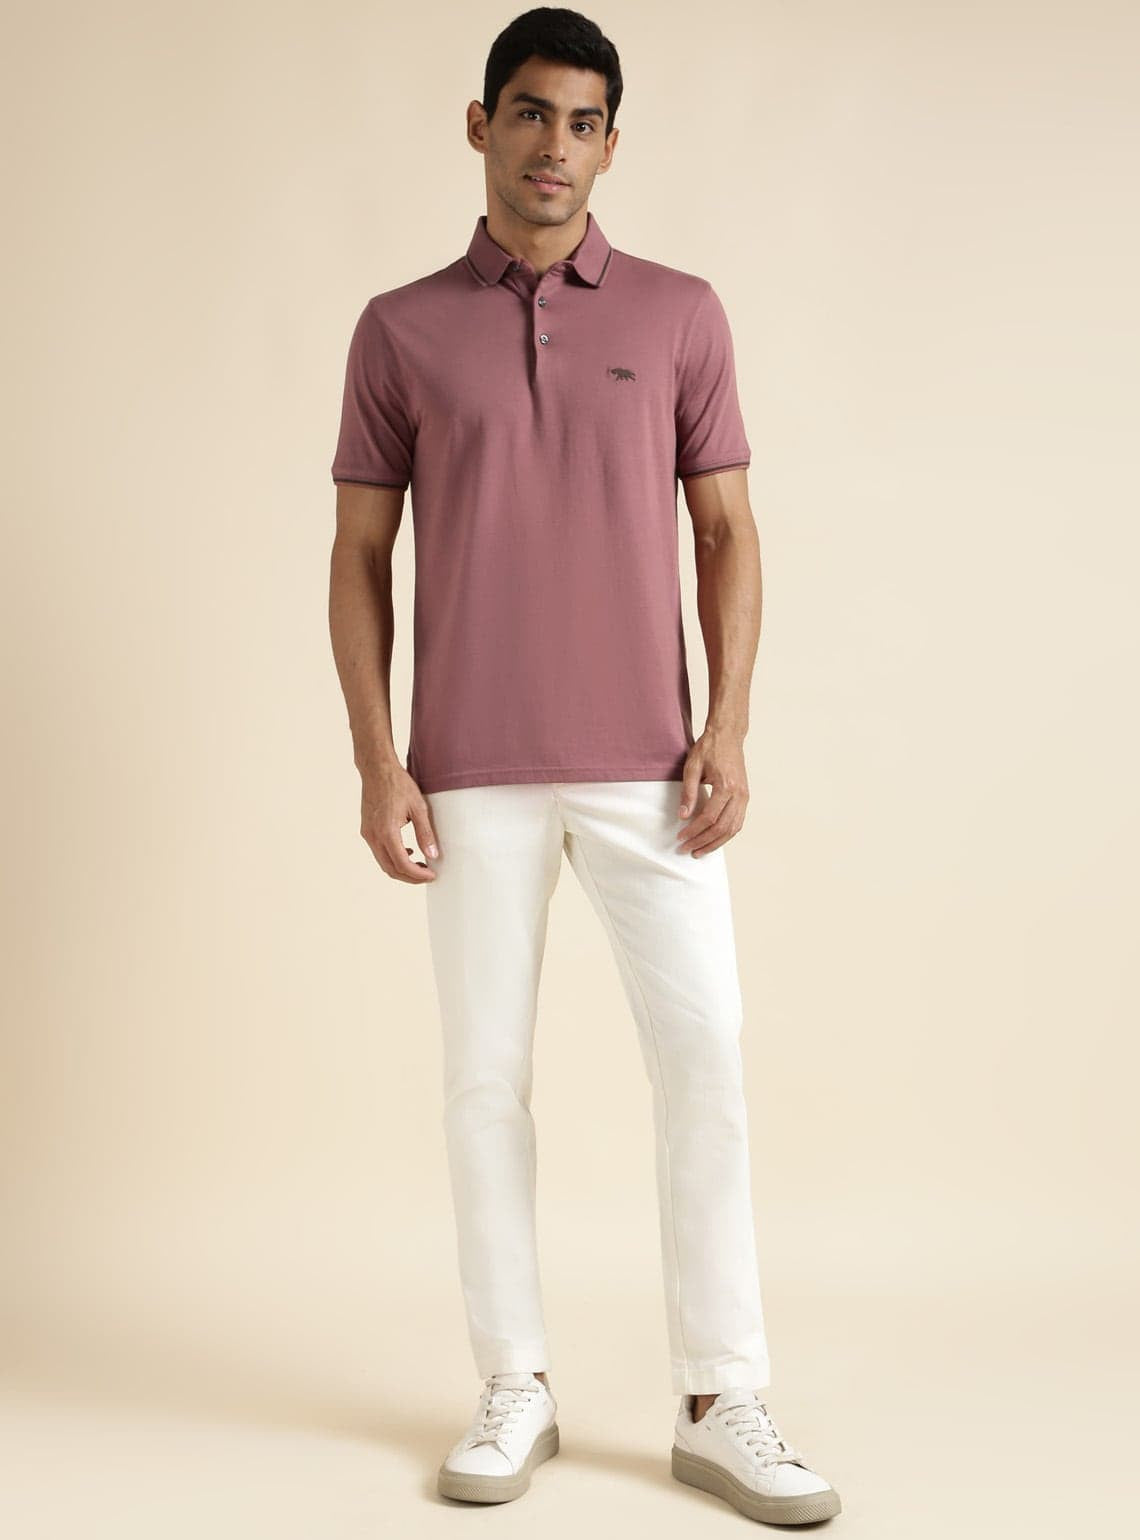 Rosewood Pink Polo